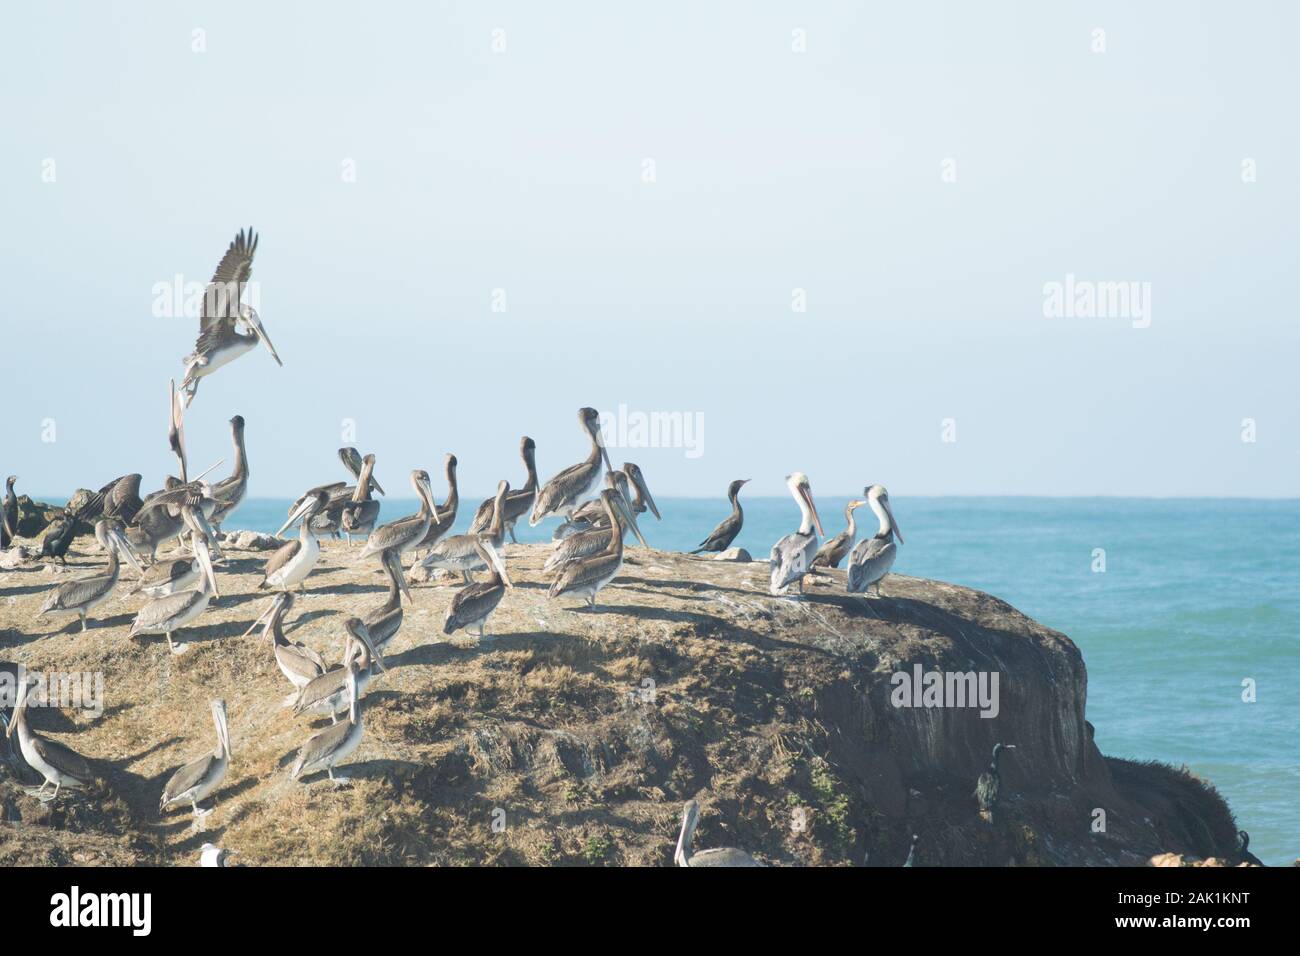 Large flock of Brown Pelicans on a rock in Pacific Ocean. One pelican taking off in flight. Stock Photo